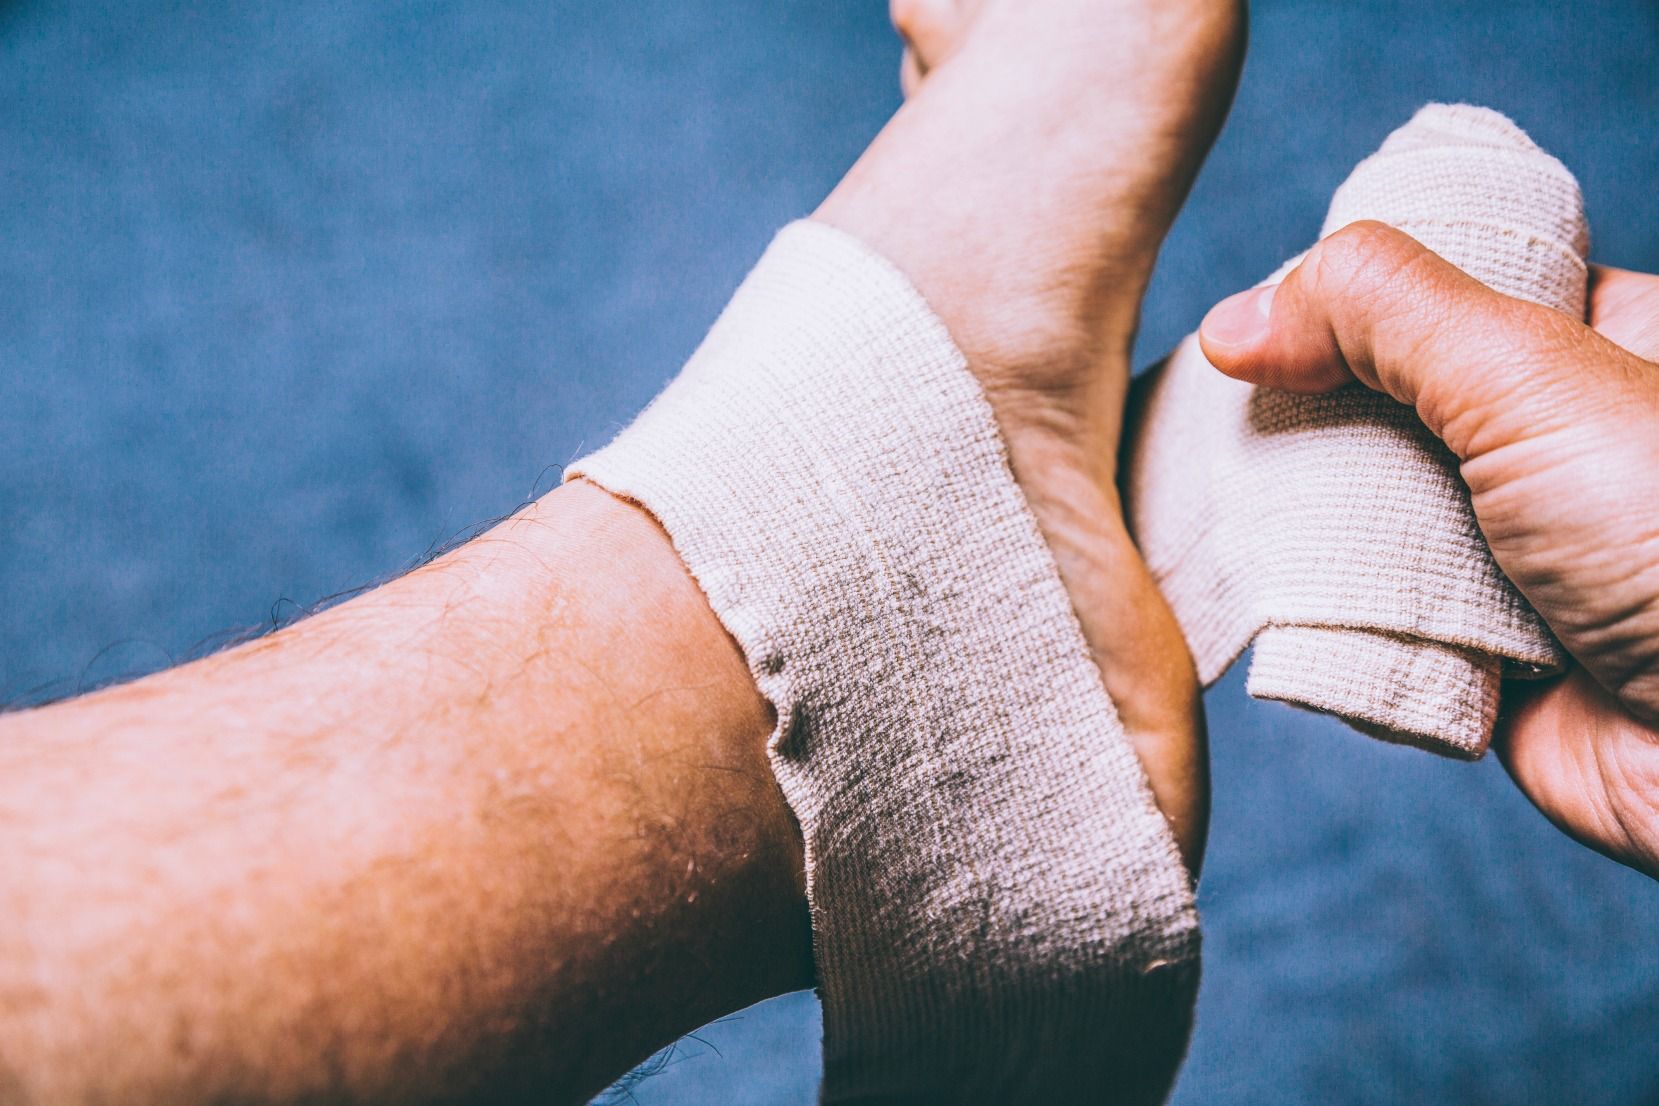 How Long Does Sprained Ankle Take to Heal?